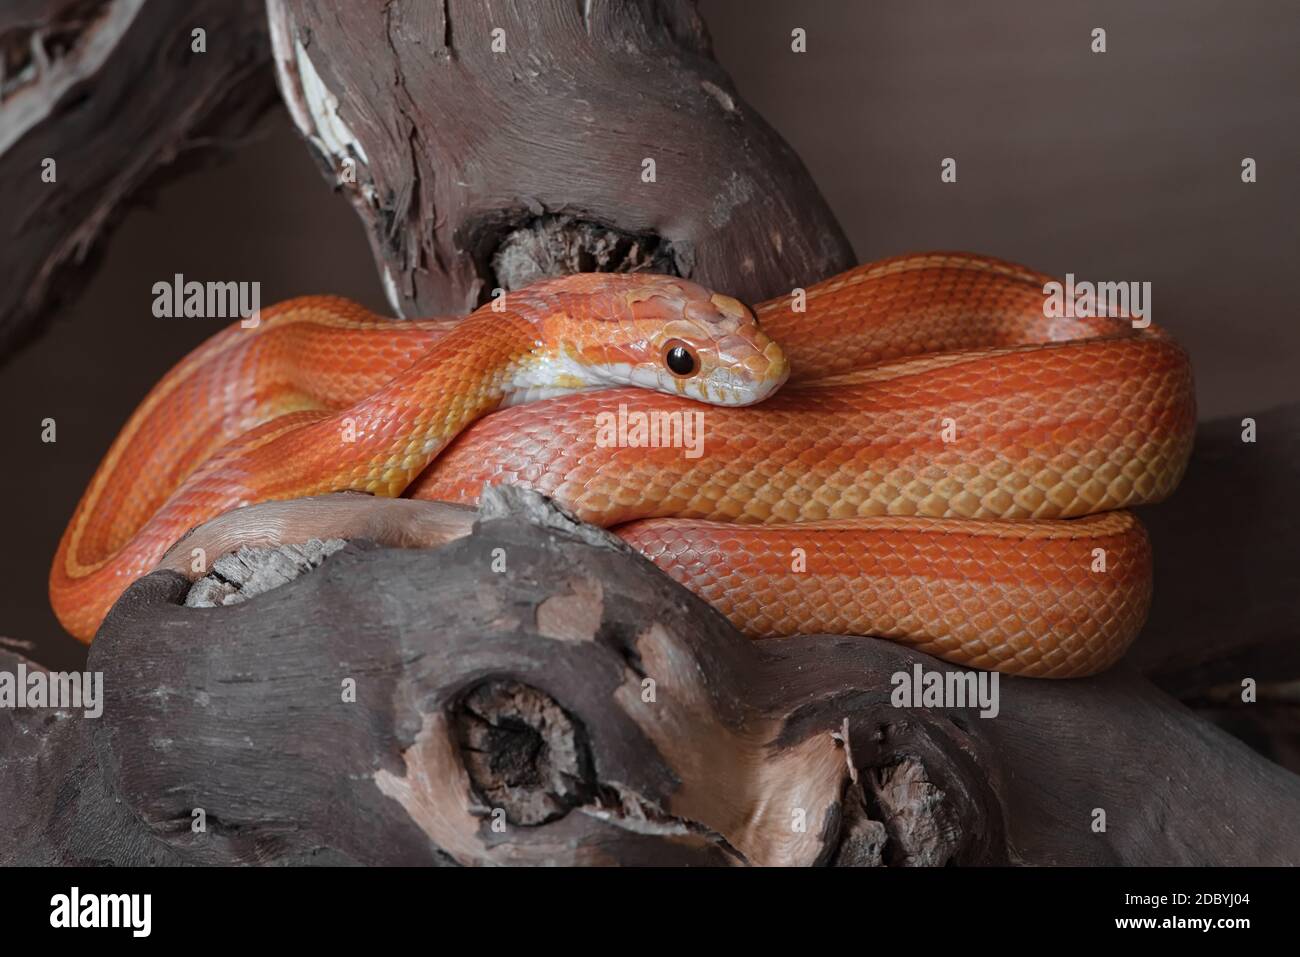 Yellow, orange and red striped corn snake is sat coiled on a thick branch. Vibrant colored morph patterning pops against plain background. Stock Photo